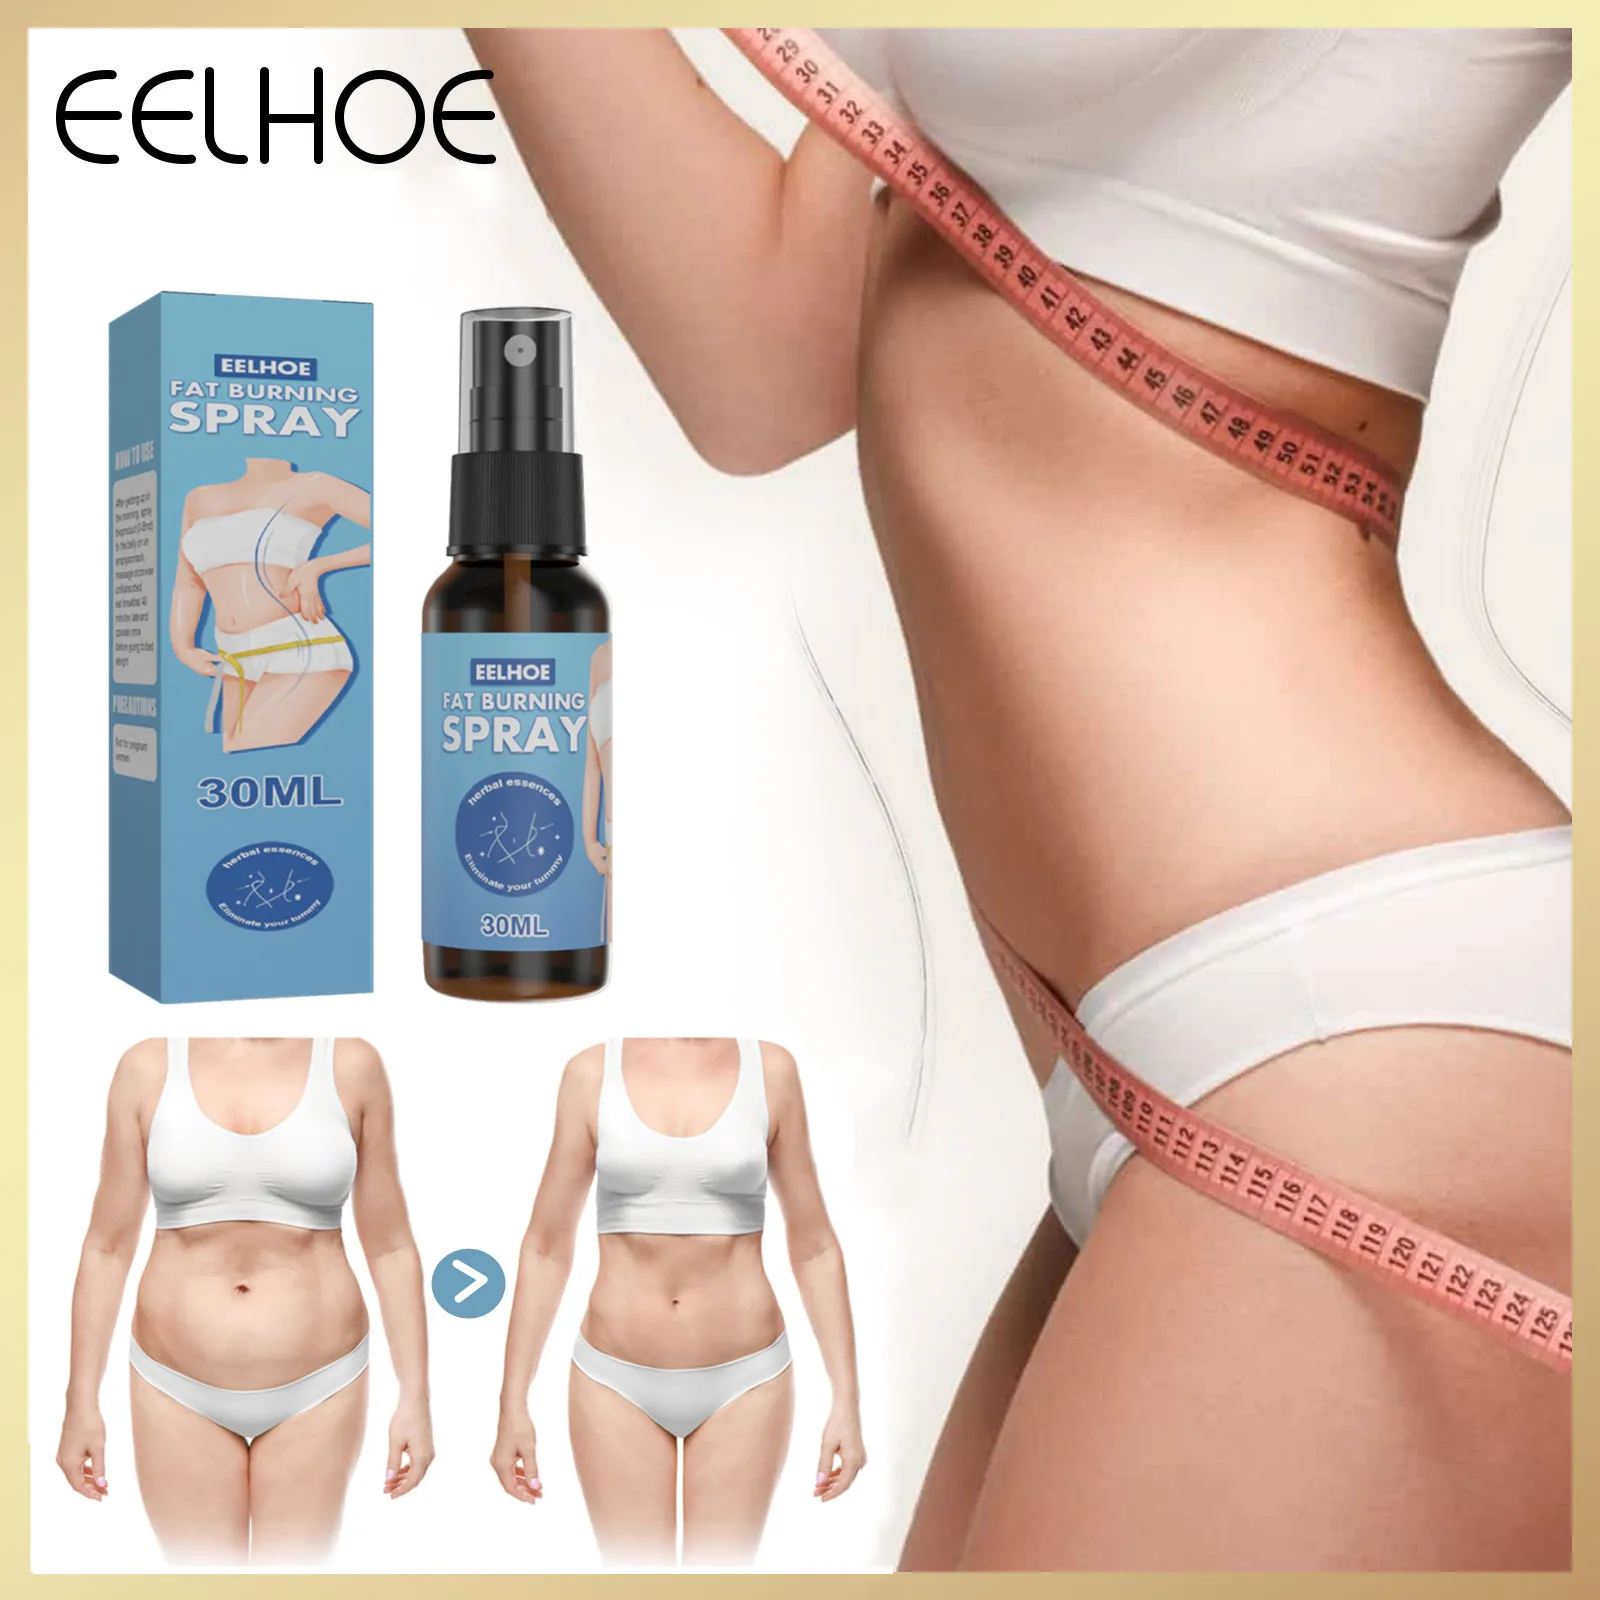 

Fat Burning Spray Fast Weight Loss Eliminate Essential Oil Promote Cellulite Burn Waist Shaping Big Belly Slimming Body Care 30g